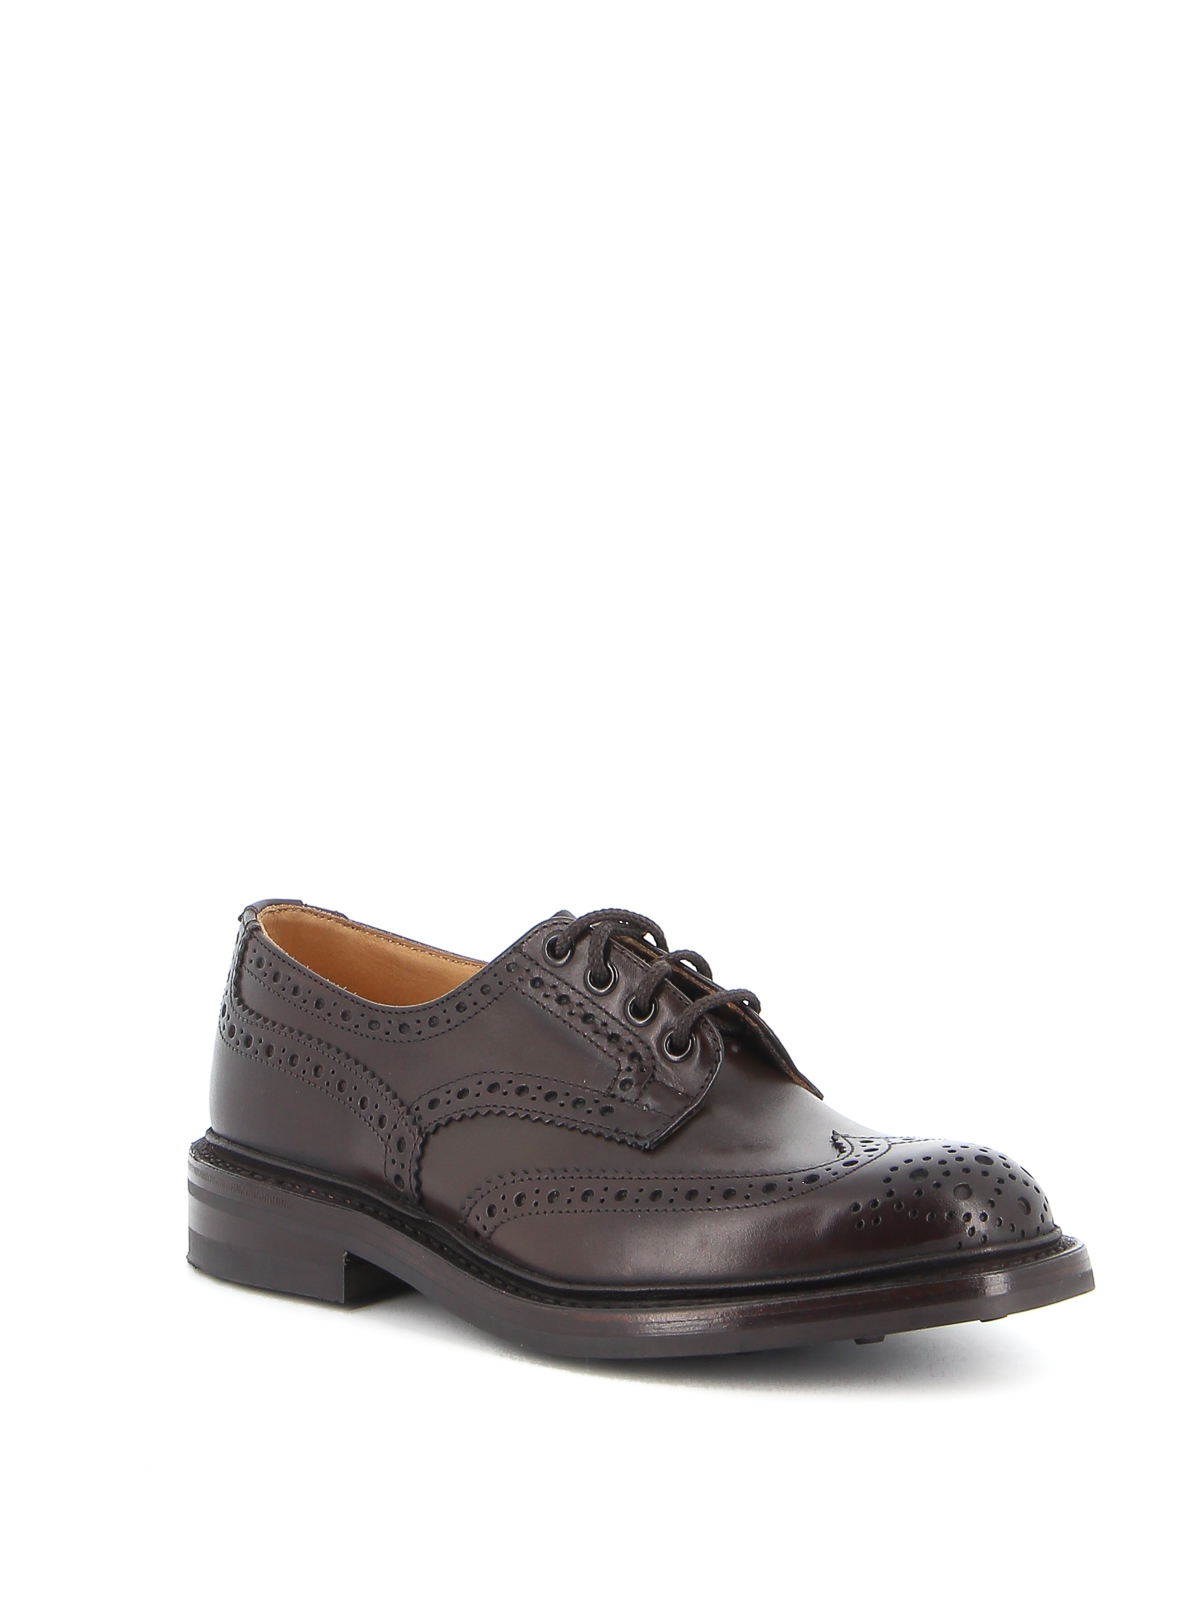 trickers black friday